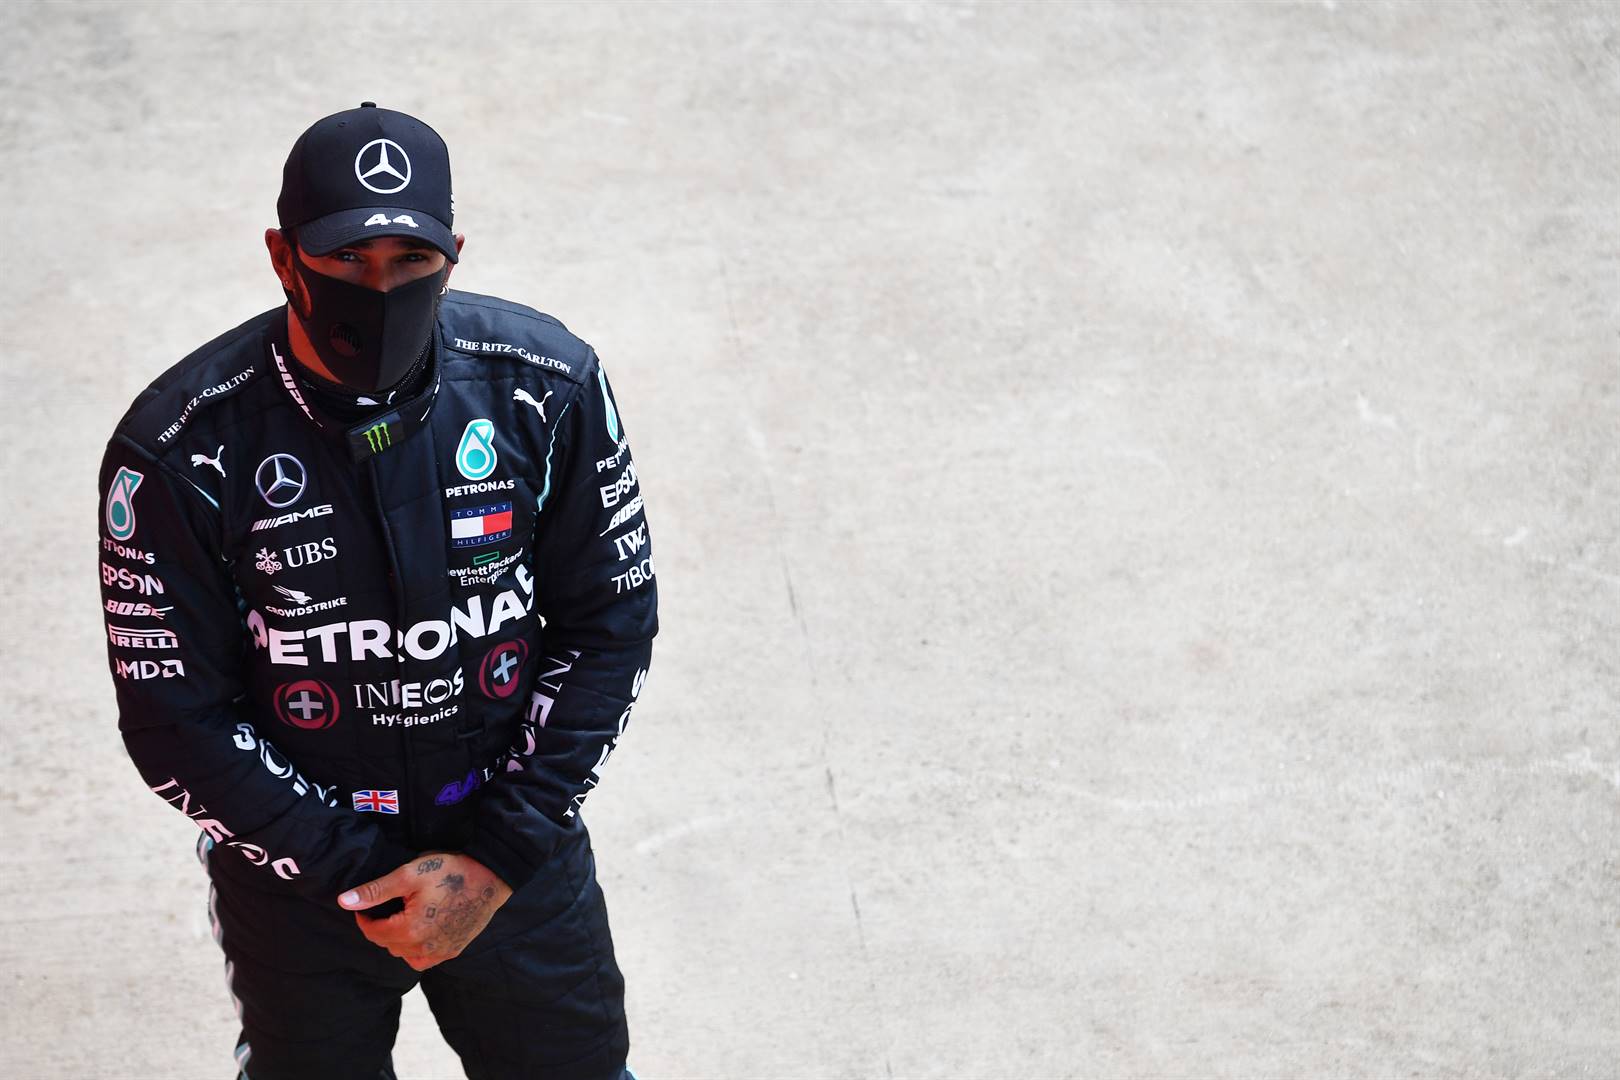 With three laps to go, both cars needed to engage in some serious tyre management as both Valteri Bottas and Lewis Hamilton picked up front left punctures, with Hamilton’s almost costing him the race victory. Picture: Ben Stansall / Pool via Getty Images